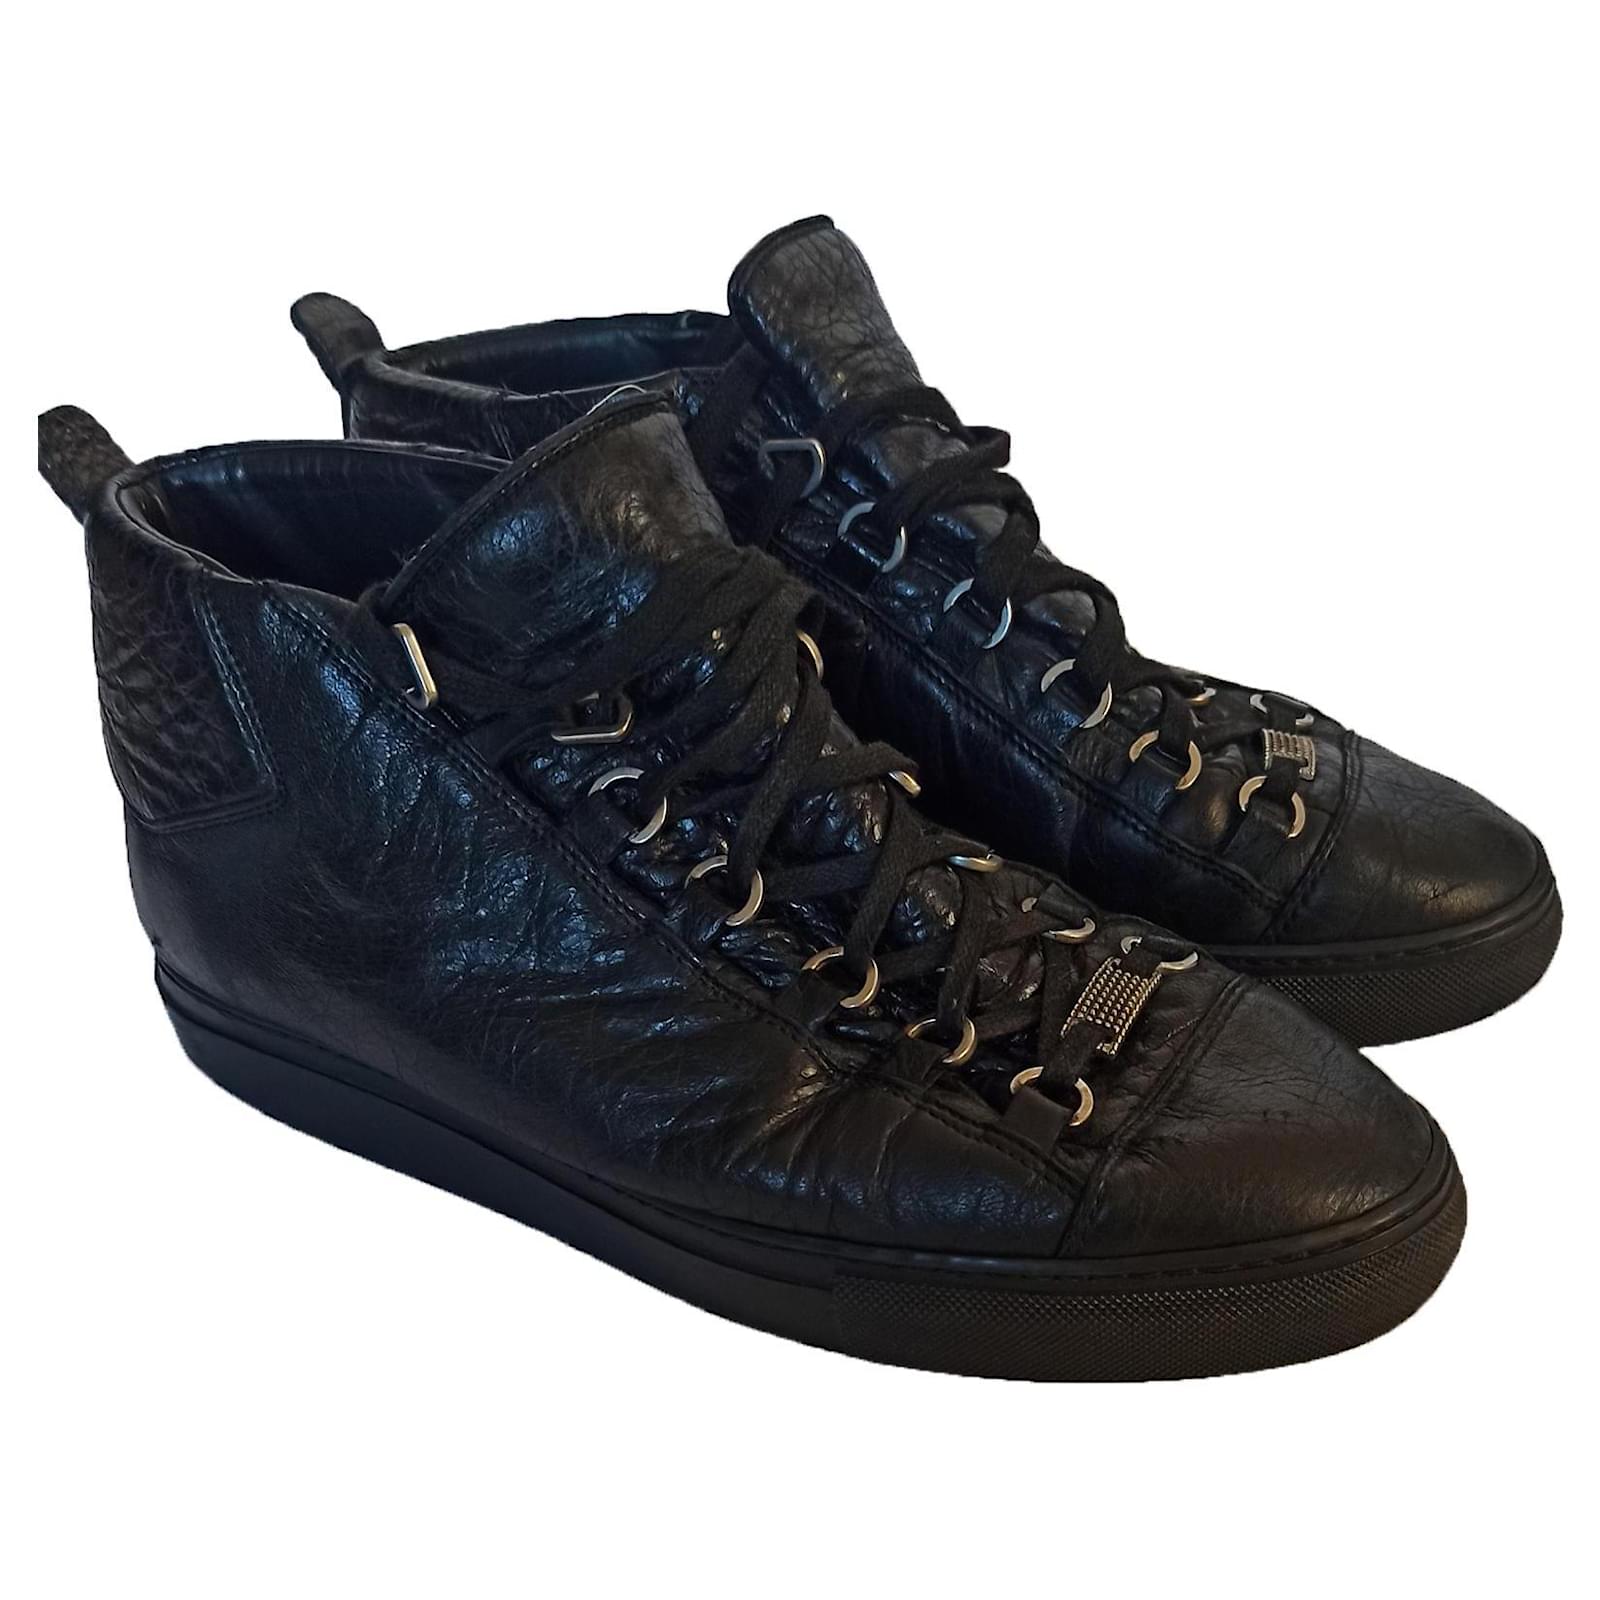 Balenciaga Arena Leather High Sz 43 10 Thick Sole Sneaker Shoe MSRP 545  Classic  eBay